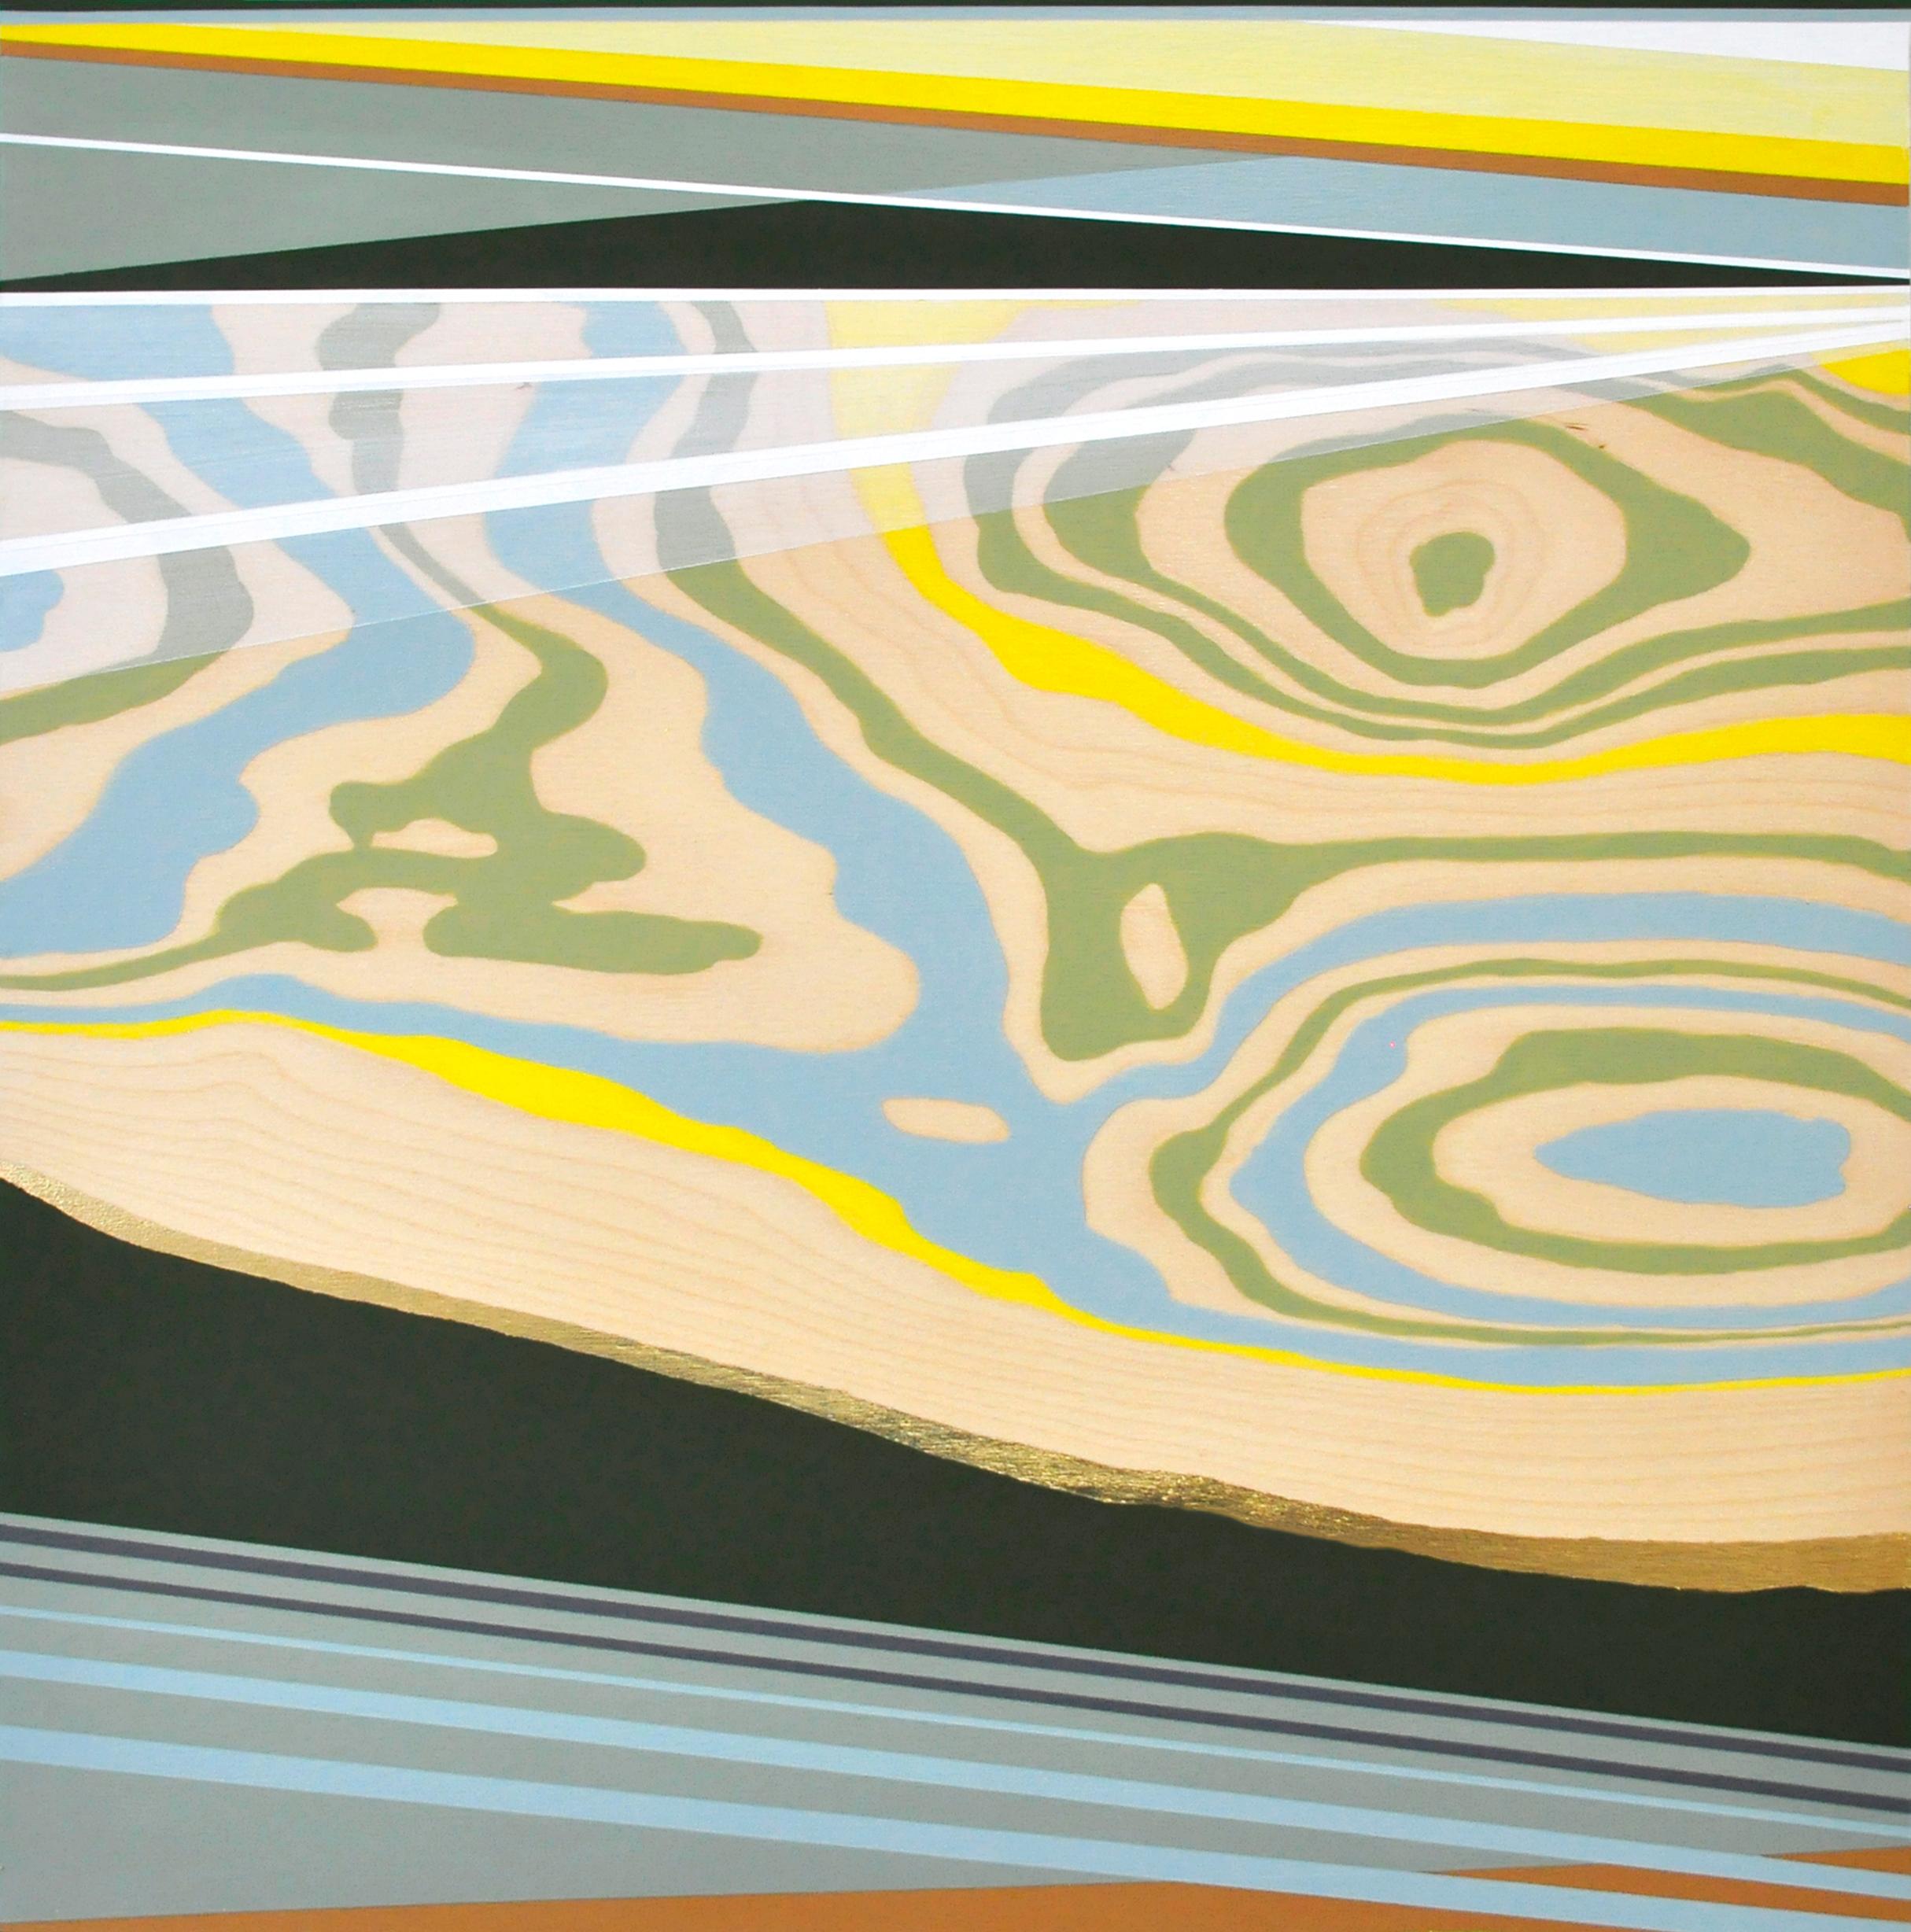 Edging toward Spring: abstract Japanese inspired landscape w/ gold, blue & green